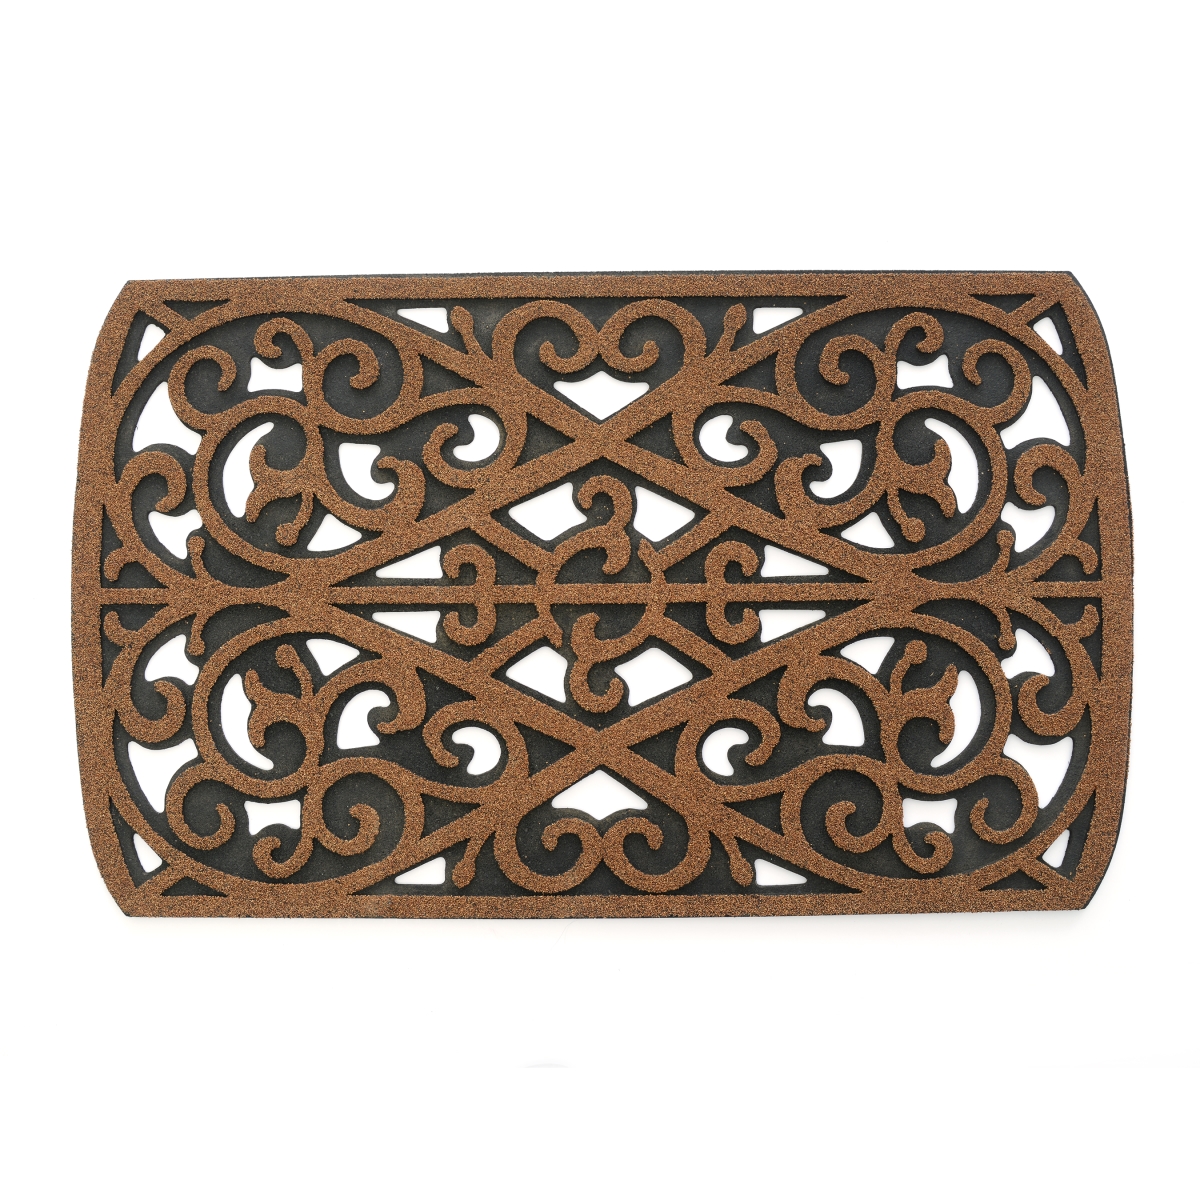 30n-18rm59-06 18 X 30 In. Recycled Rubber Doormat - Coconut Shell